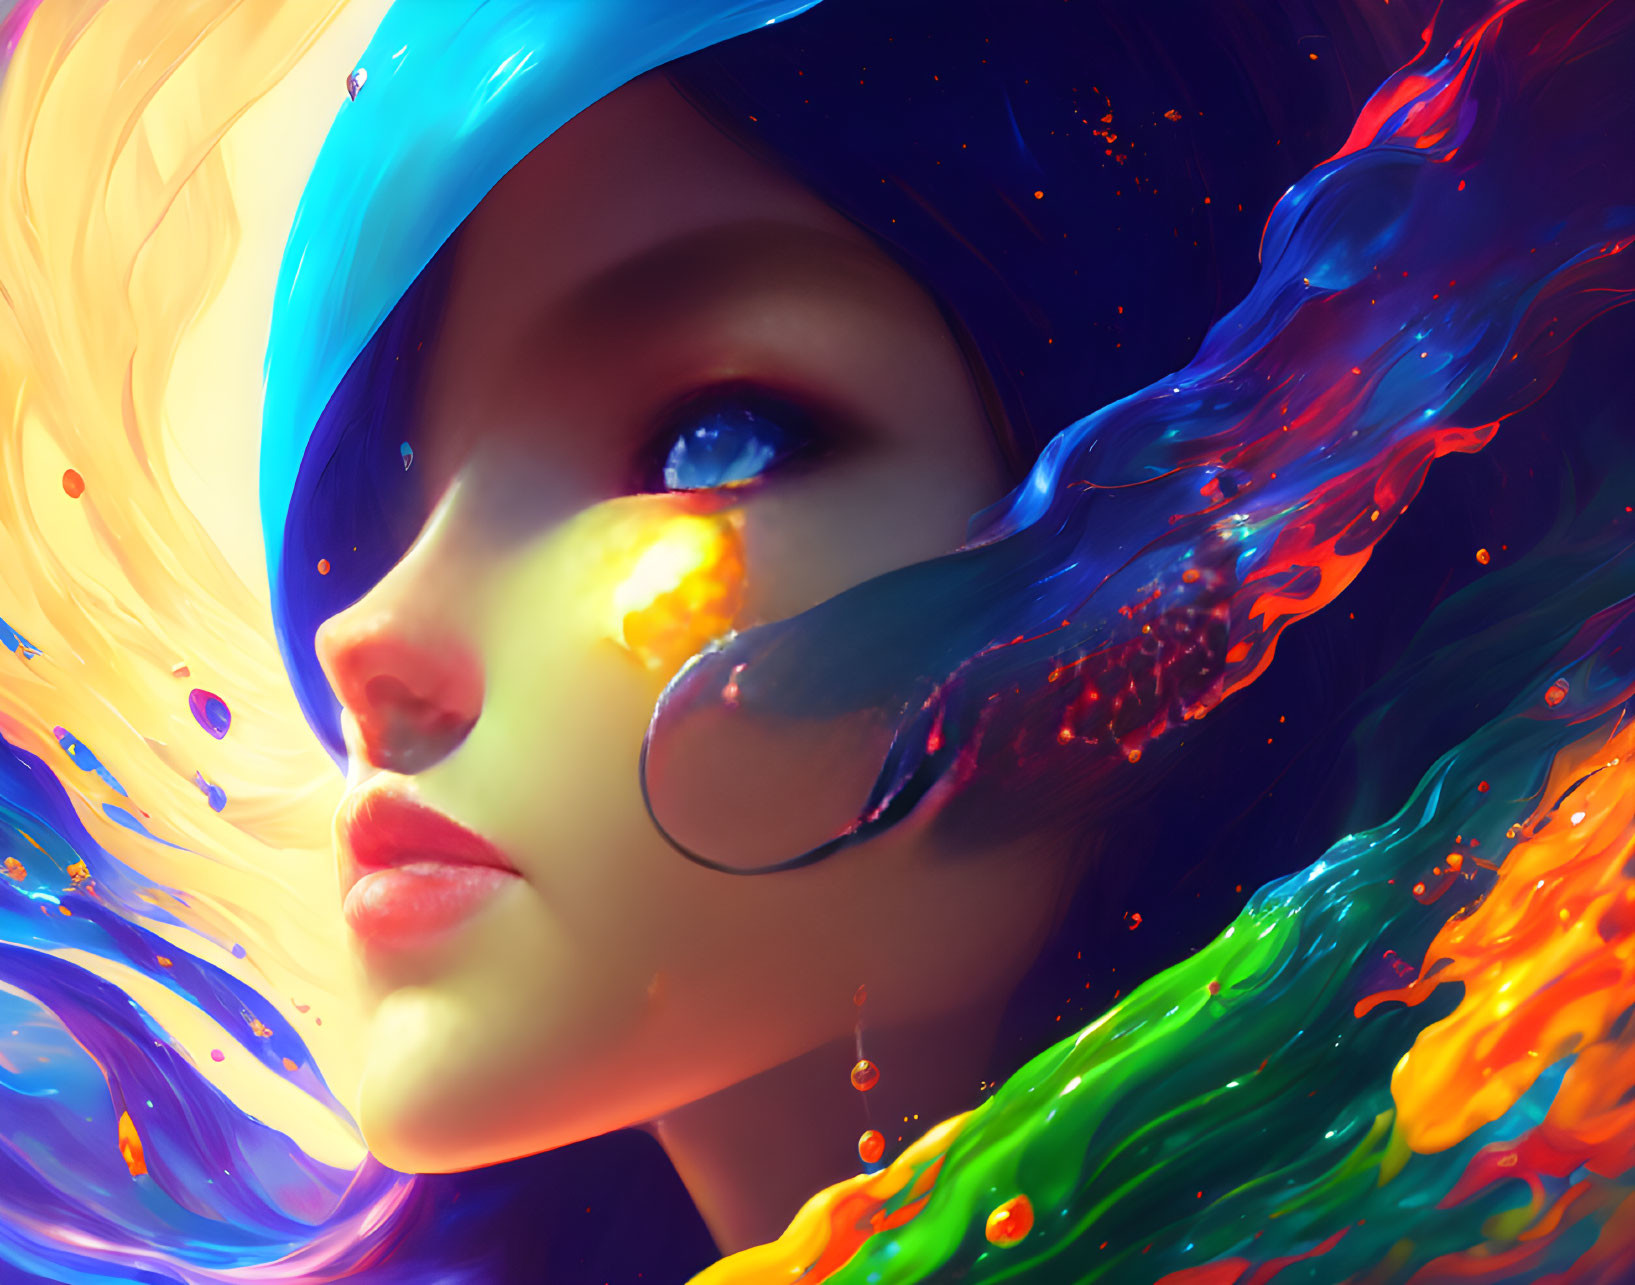 Colorful digital painting of a woman in blue cap with flowing paint against warm backdrop